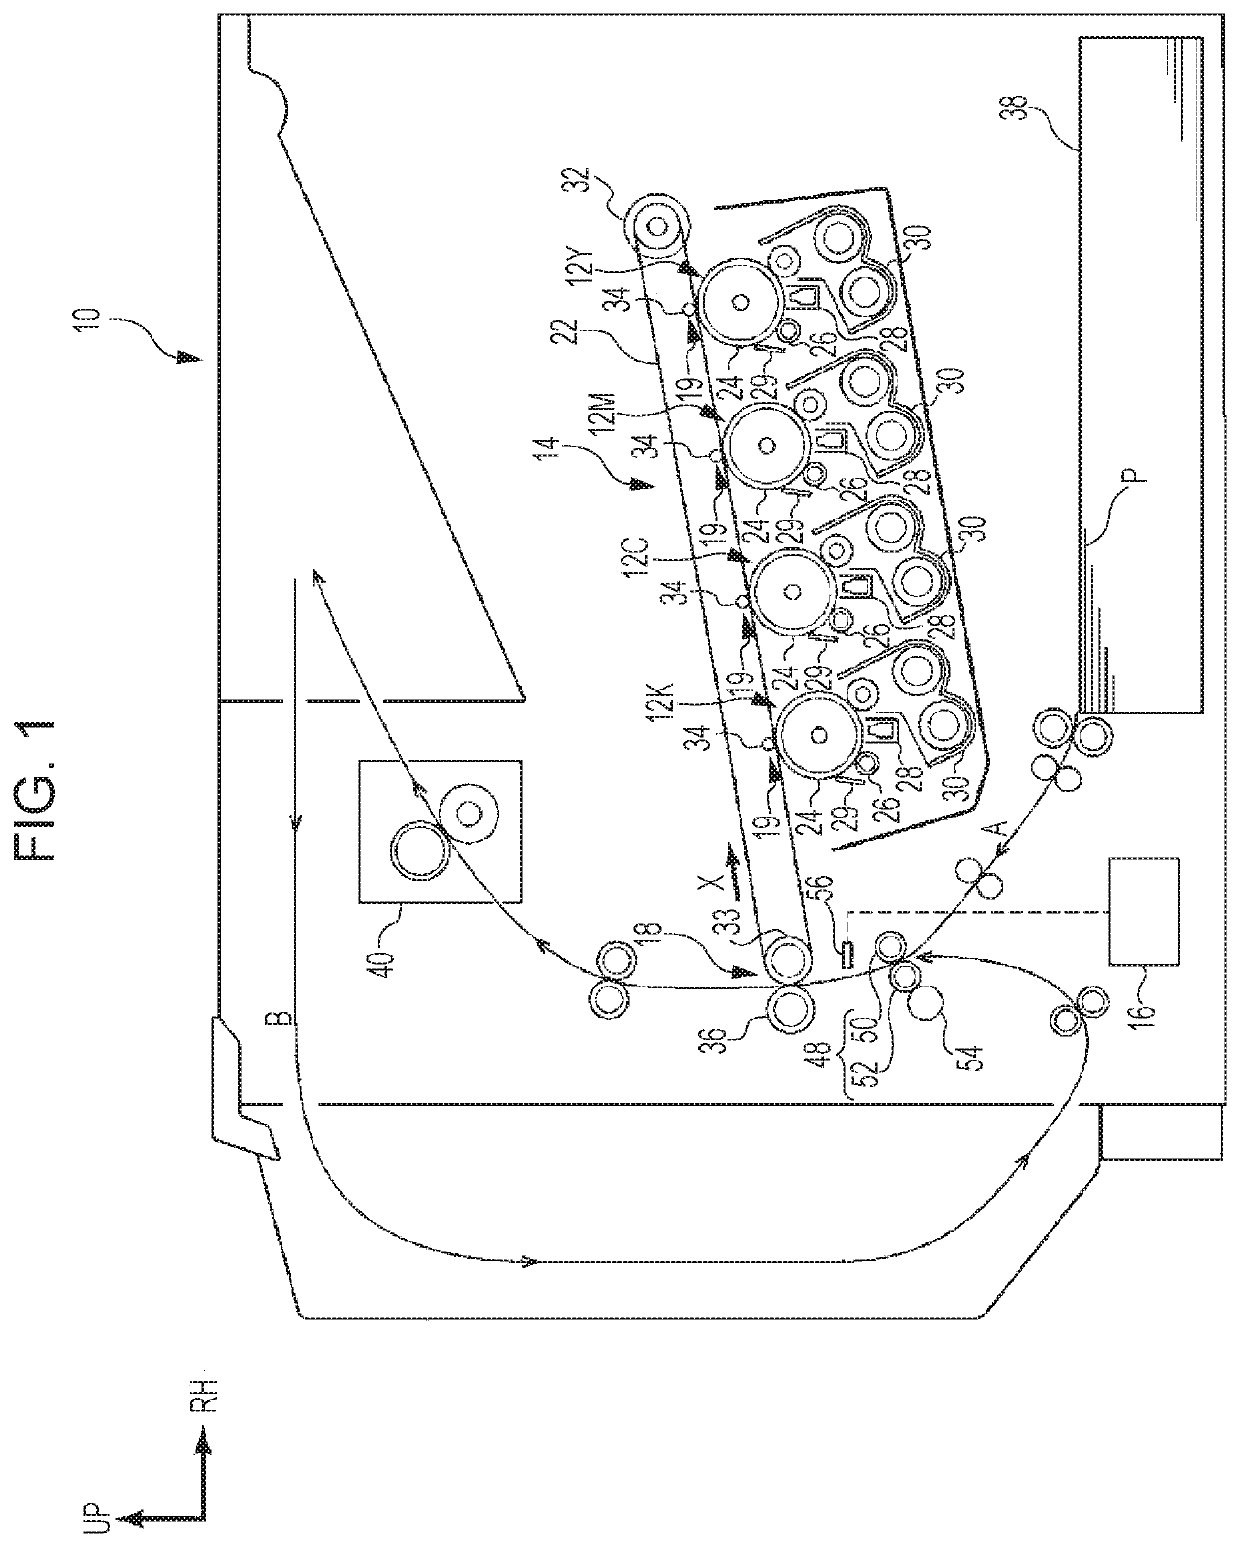 Image forming apparatus having recording medium positioning portion and control of transport speed